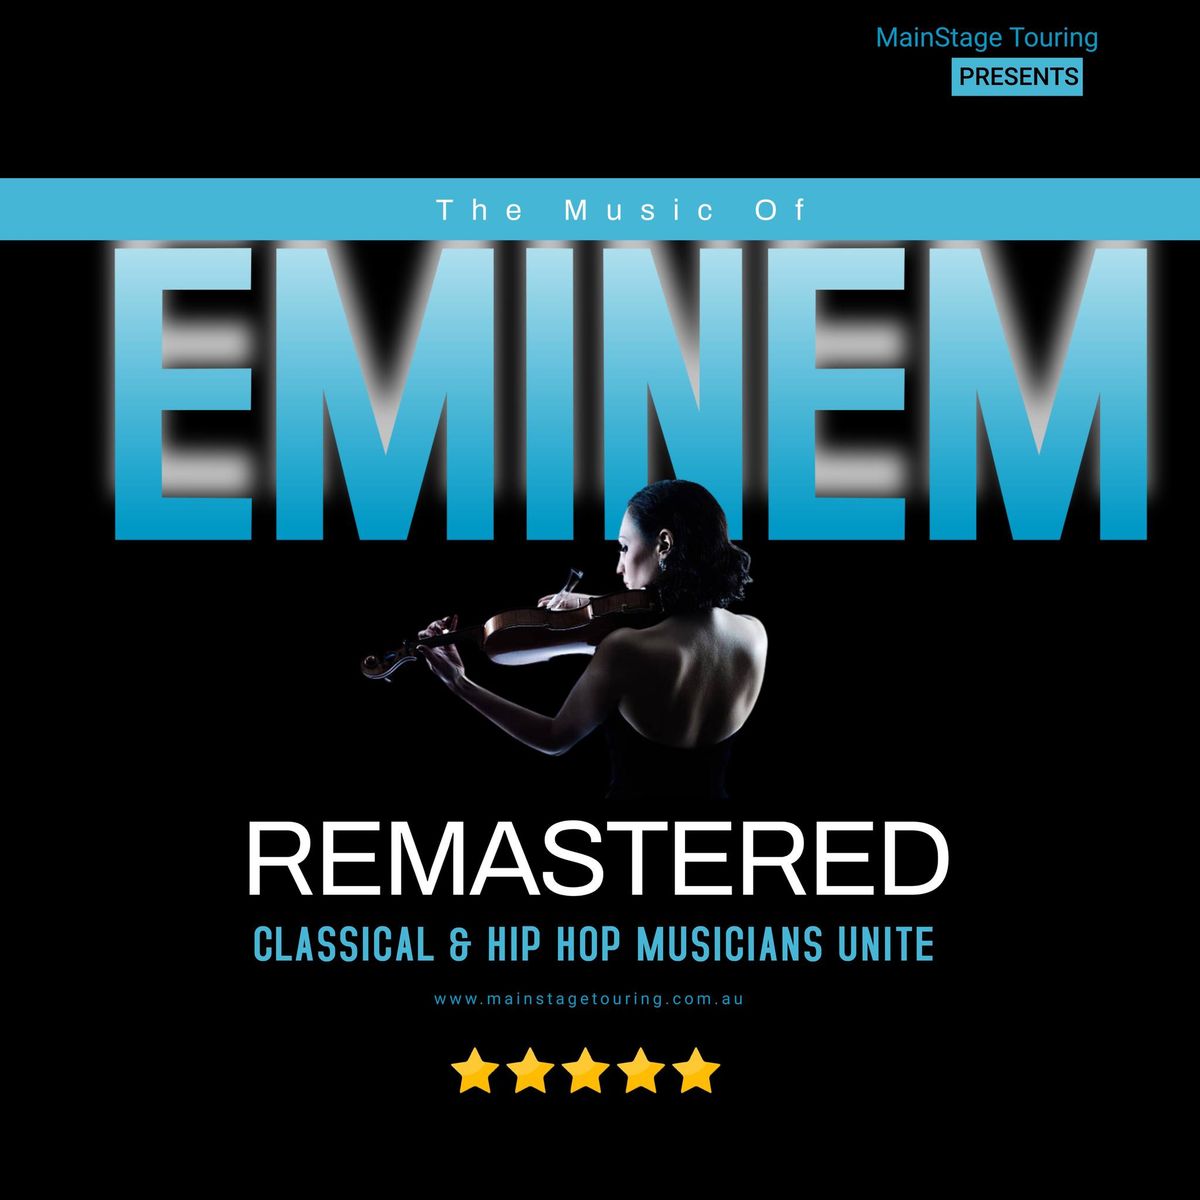 The Music of Eminem: Remastered (Perth)